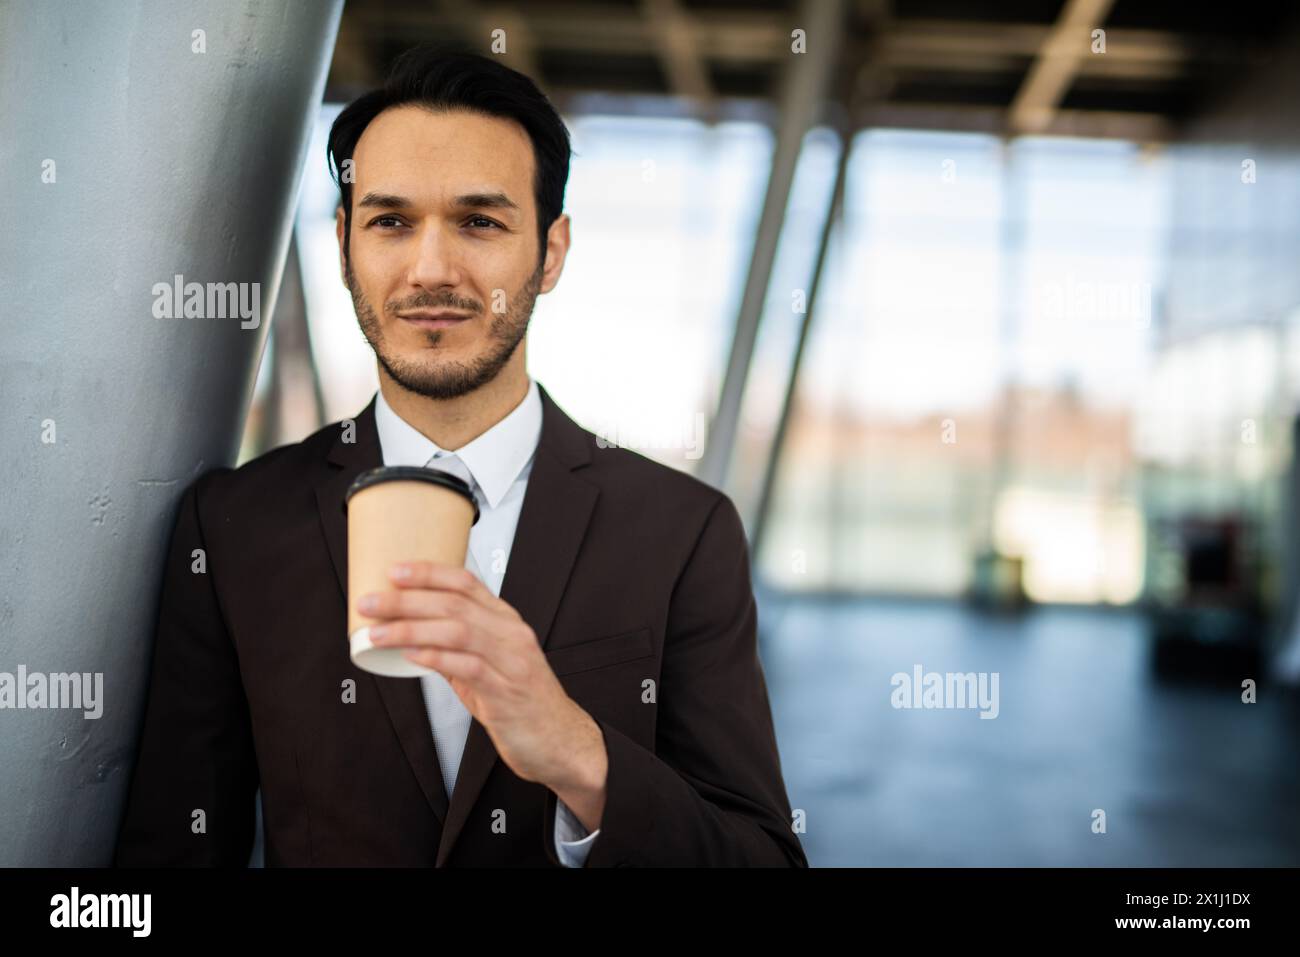 Professional young man in a suit holding a coffee cup in a bright office setting Stock Photo